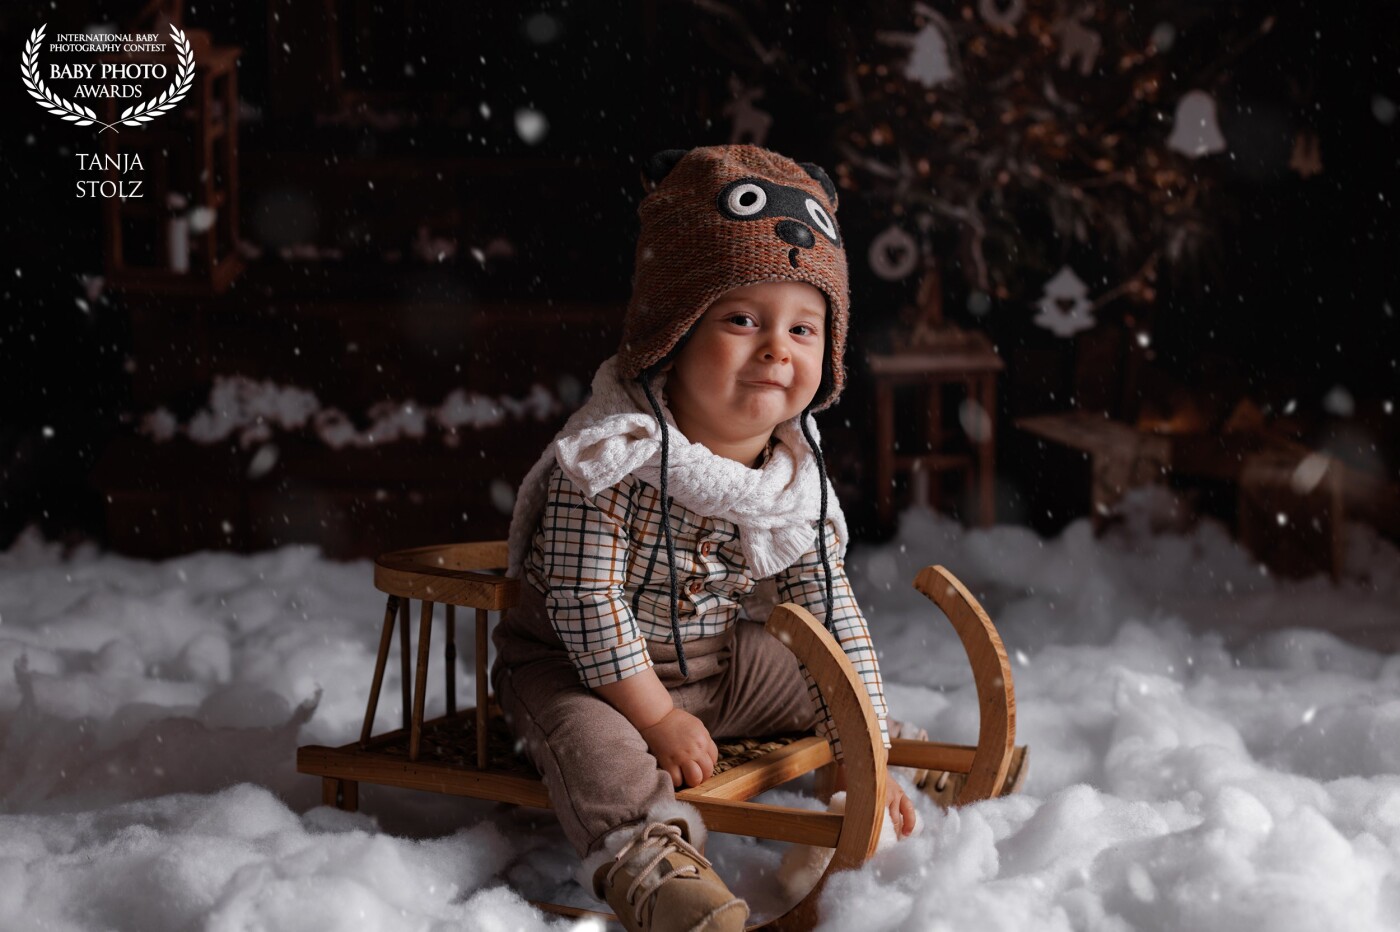 This years' christmas specials were truly magical... we created such lovely pictures with the kids playing in the "snow".  This cute little guy had so much fun on my mini sleigh and his pictures turned out really well. I'm pretty sure his grandparents will love the pictures they'll get as a gift.